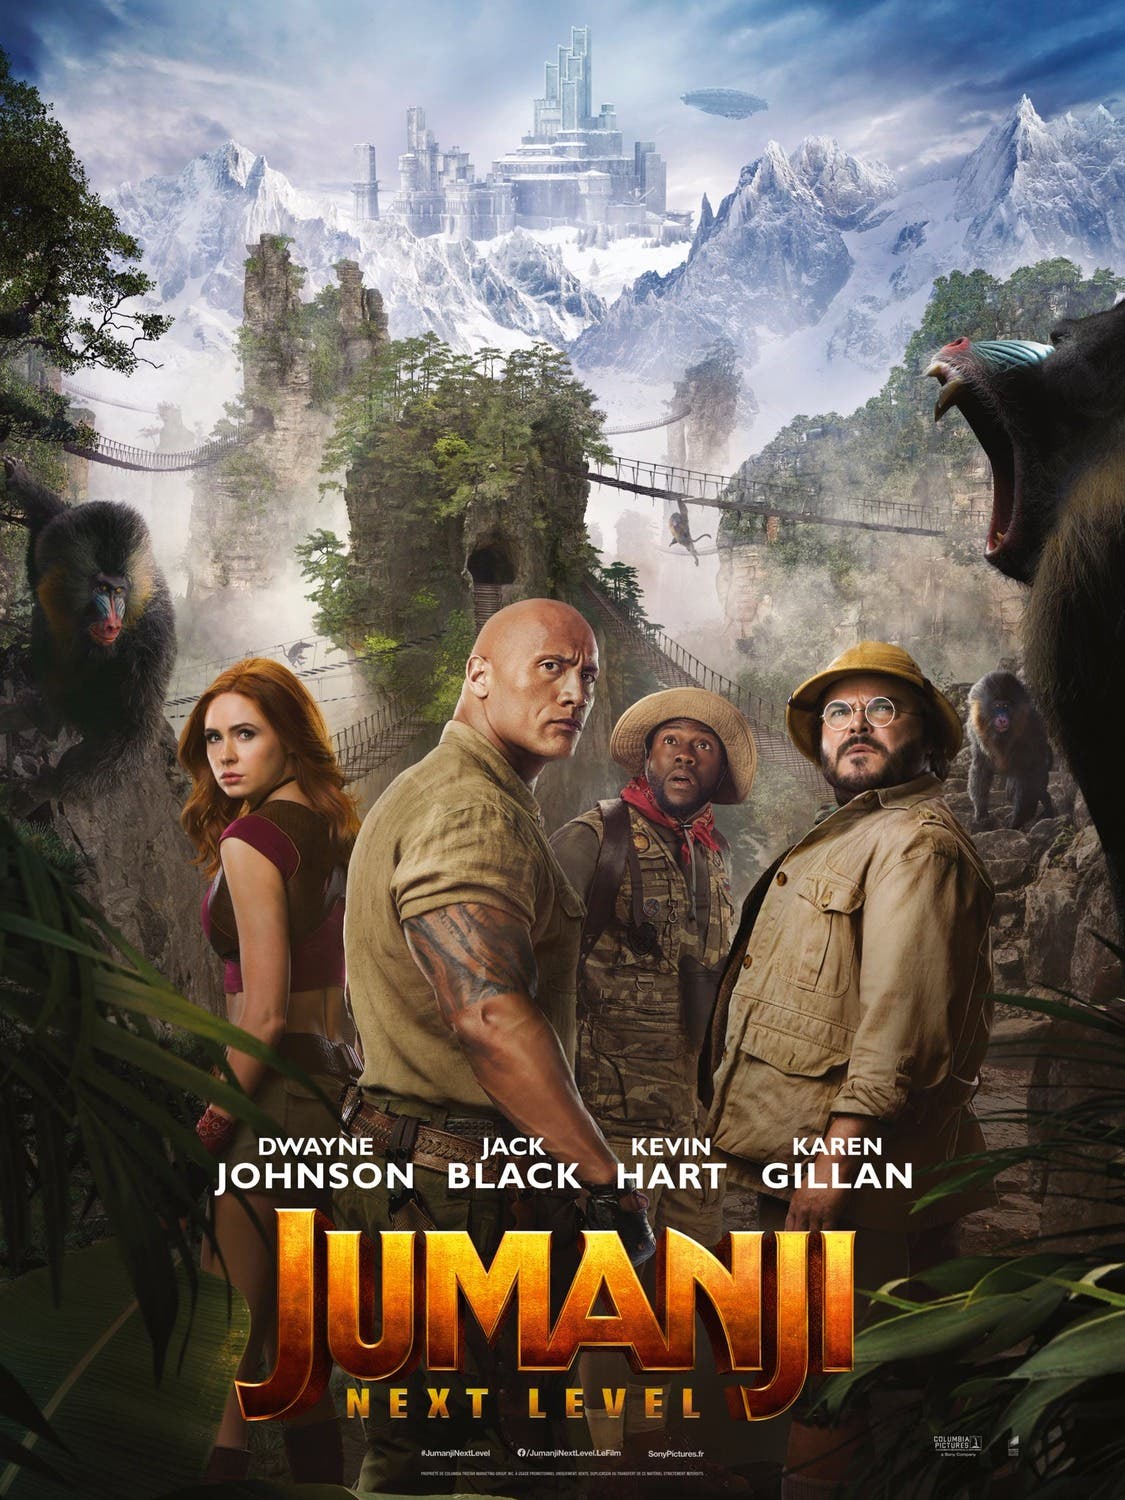 Posters for 'Jumanji' Sequel, 'The Turning,' 'Beautiful Day' are Here